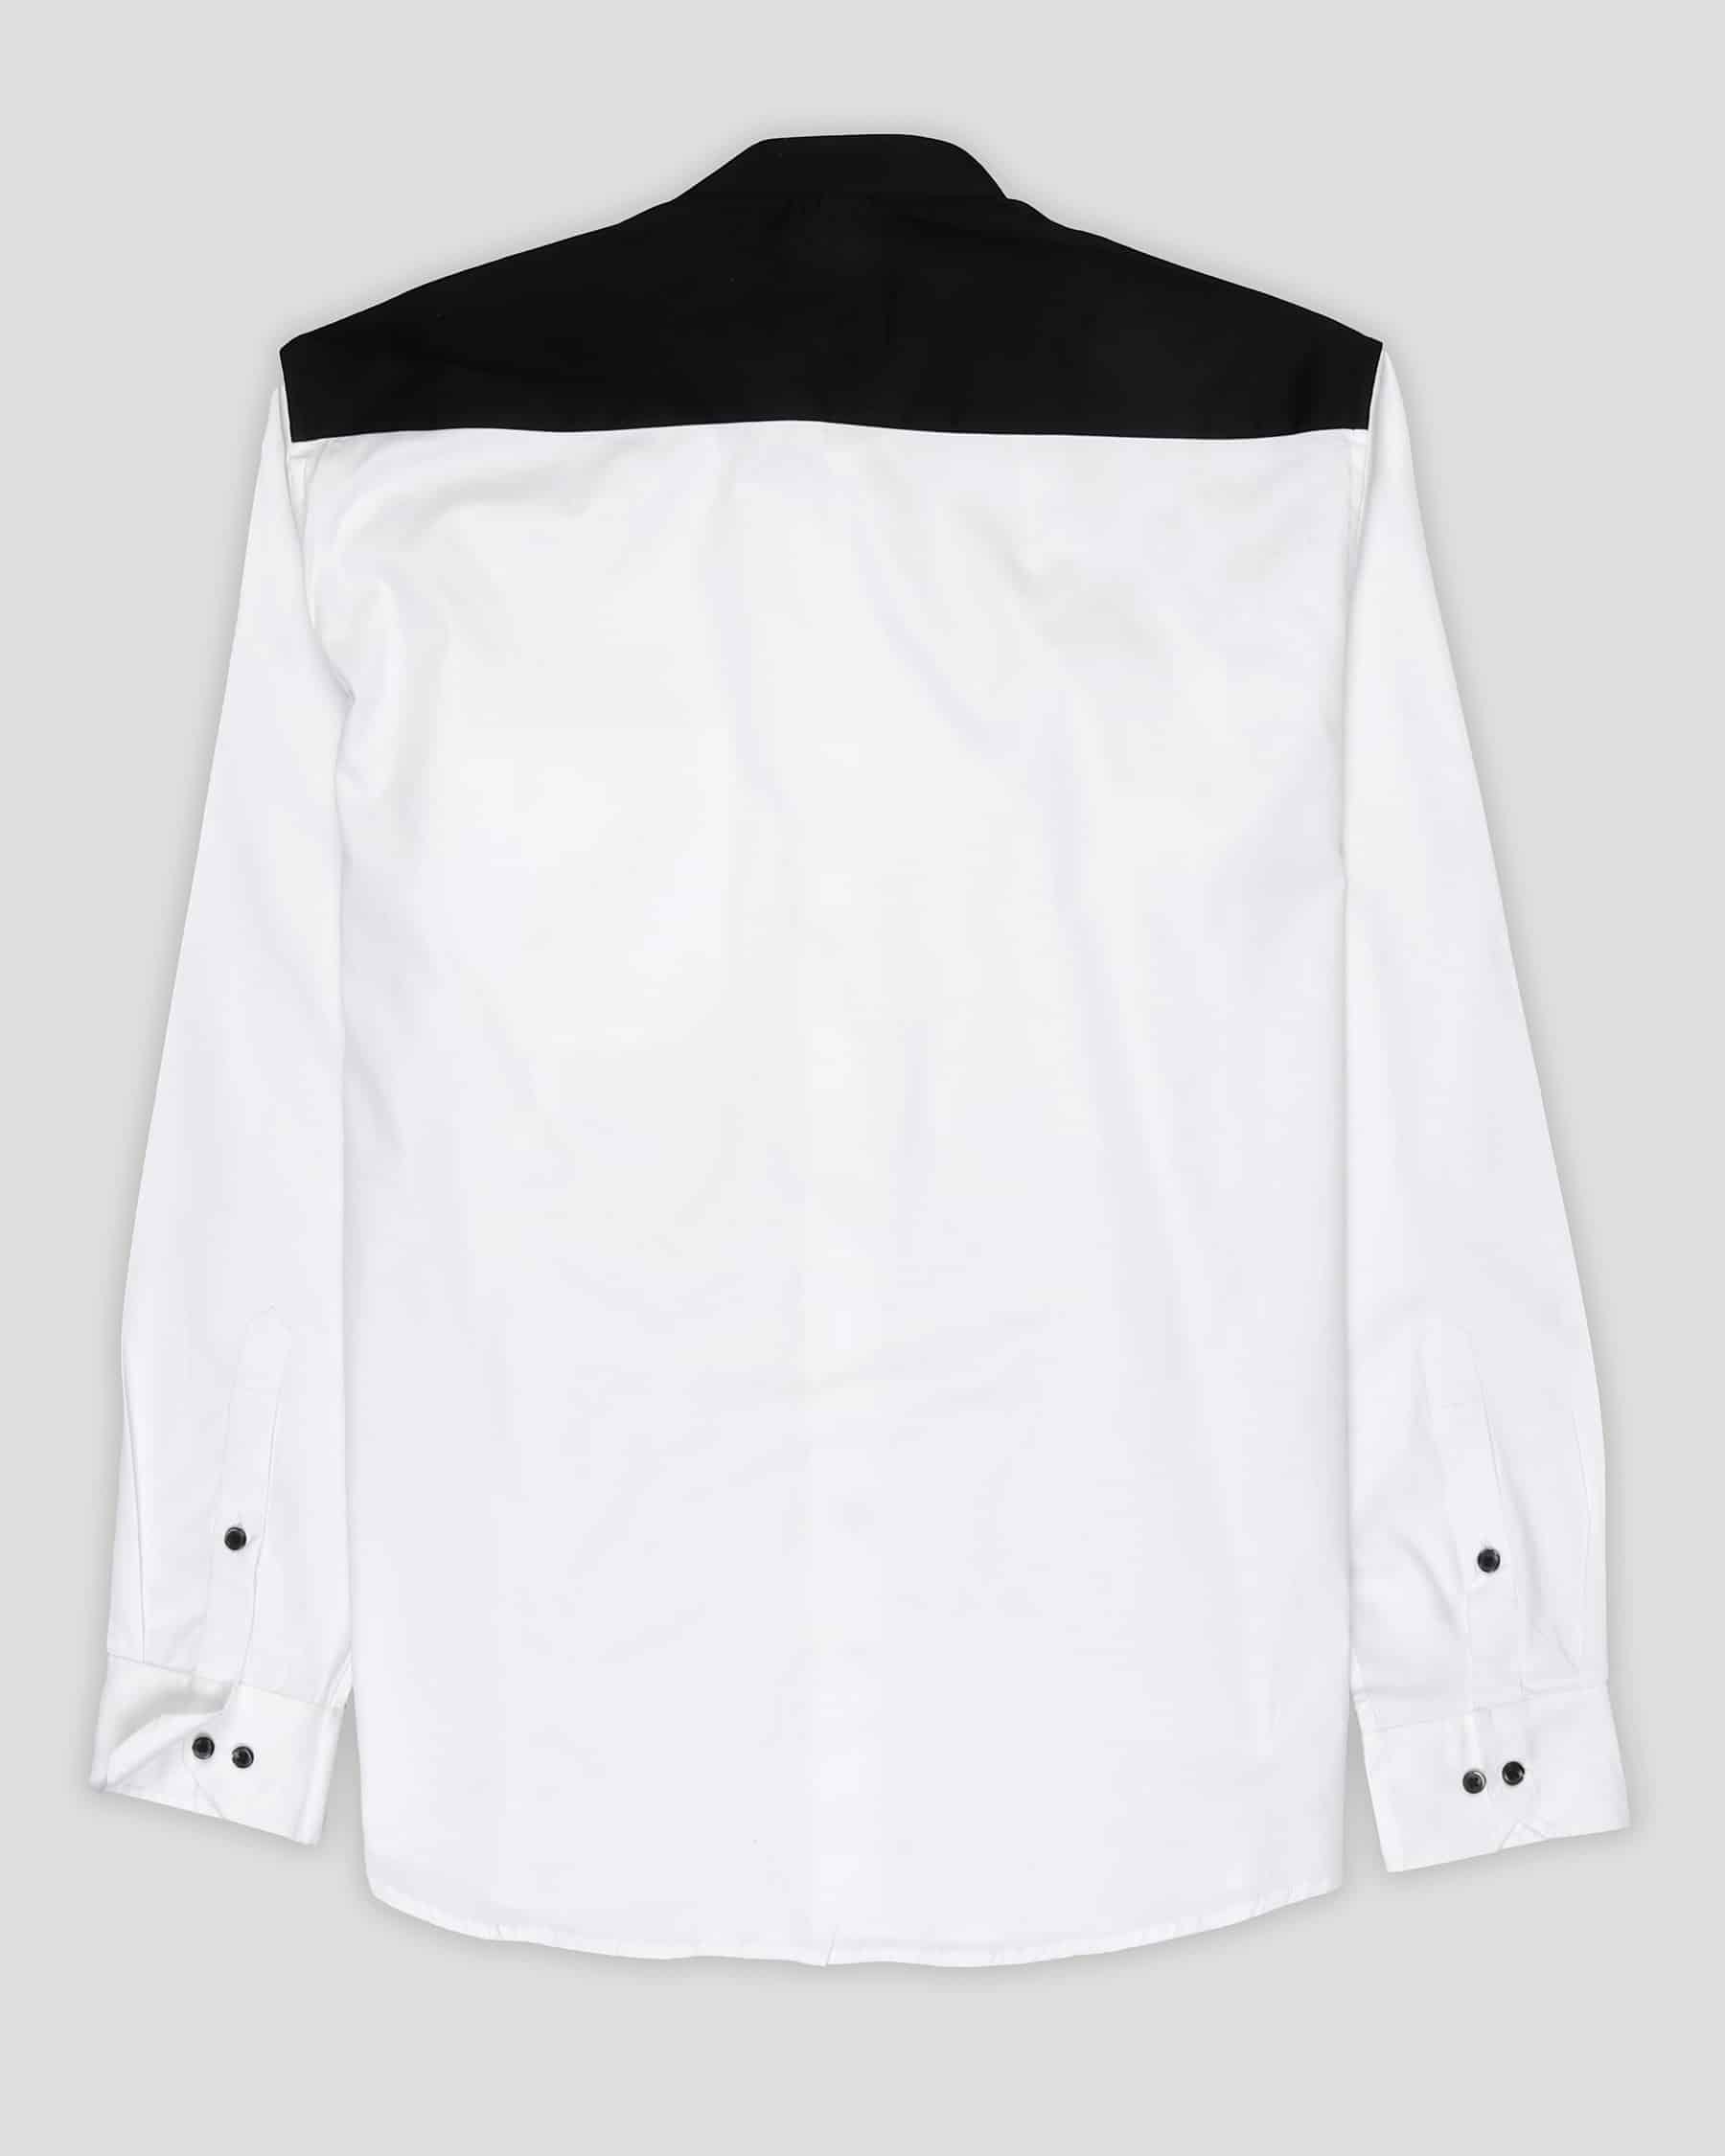 Bright White Subtle Sheen Patch Patterned Giza Cotton Shirt 3118-M-BLK-P16-38, 3118-M-BLK-P16-H-38, 3118-M-BLK-P16-39, 3118-M-BLK-P16-H-39, 3118-M-BLK-P16-40, 3118-M-BLK-P16-H-40, 3118-M-BLK-P16-42, 3118-M-BLK-P16-H-42, 3118-M-BLK-P16-44, 3118-M-BLK-P16-H-44, 3118-M-BLK-P16-46, 3118-M-BLK-P16-H-46, 3118-M-BLK-P16-48, 3118-M-BLK-P16-H-48, 3118-M-BLK-P16-50, 3118-M-BLK-P16-H-50, 3118-M-BLK-P16-52, 3118-M-BLK-P16-H-52